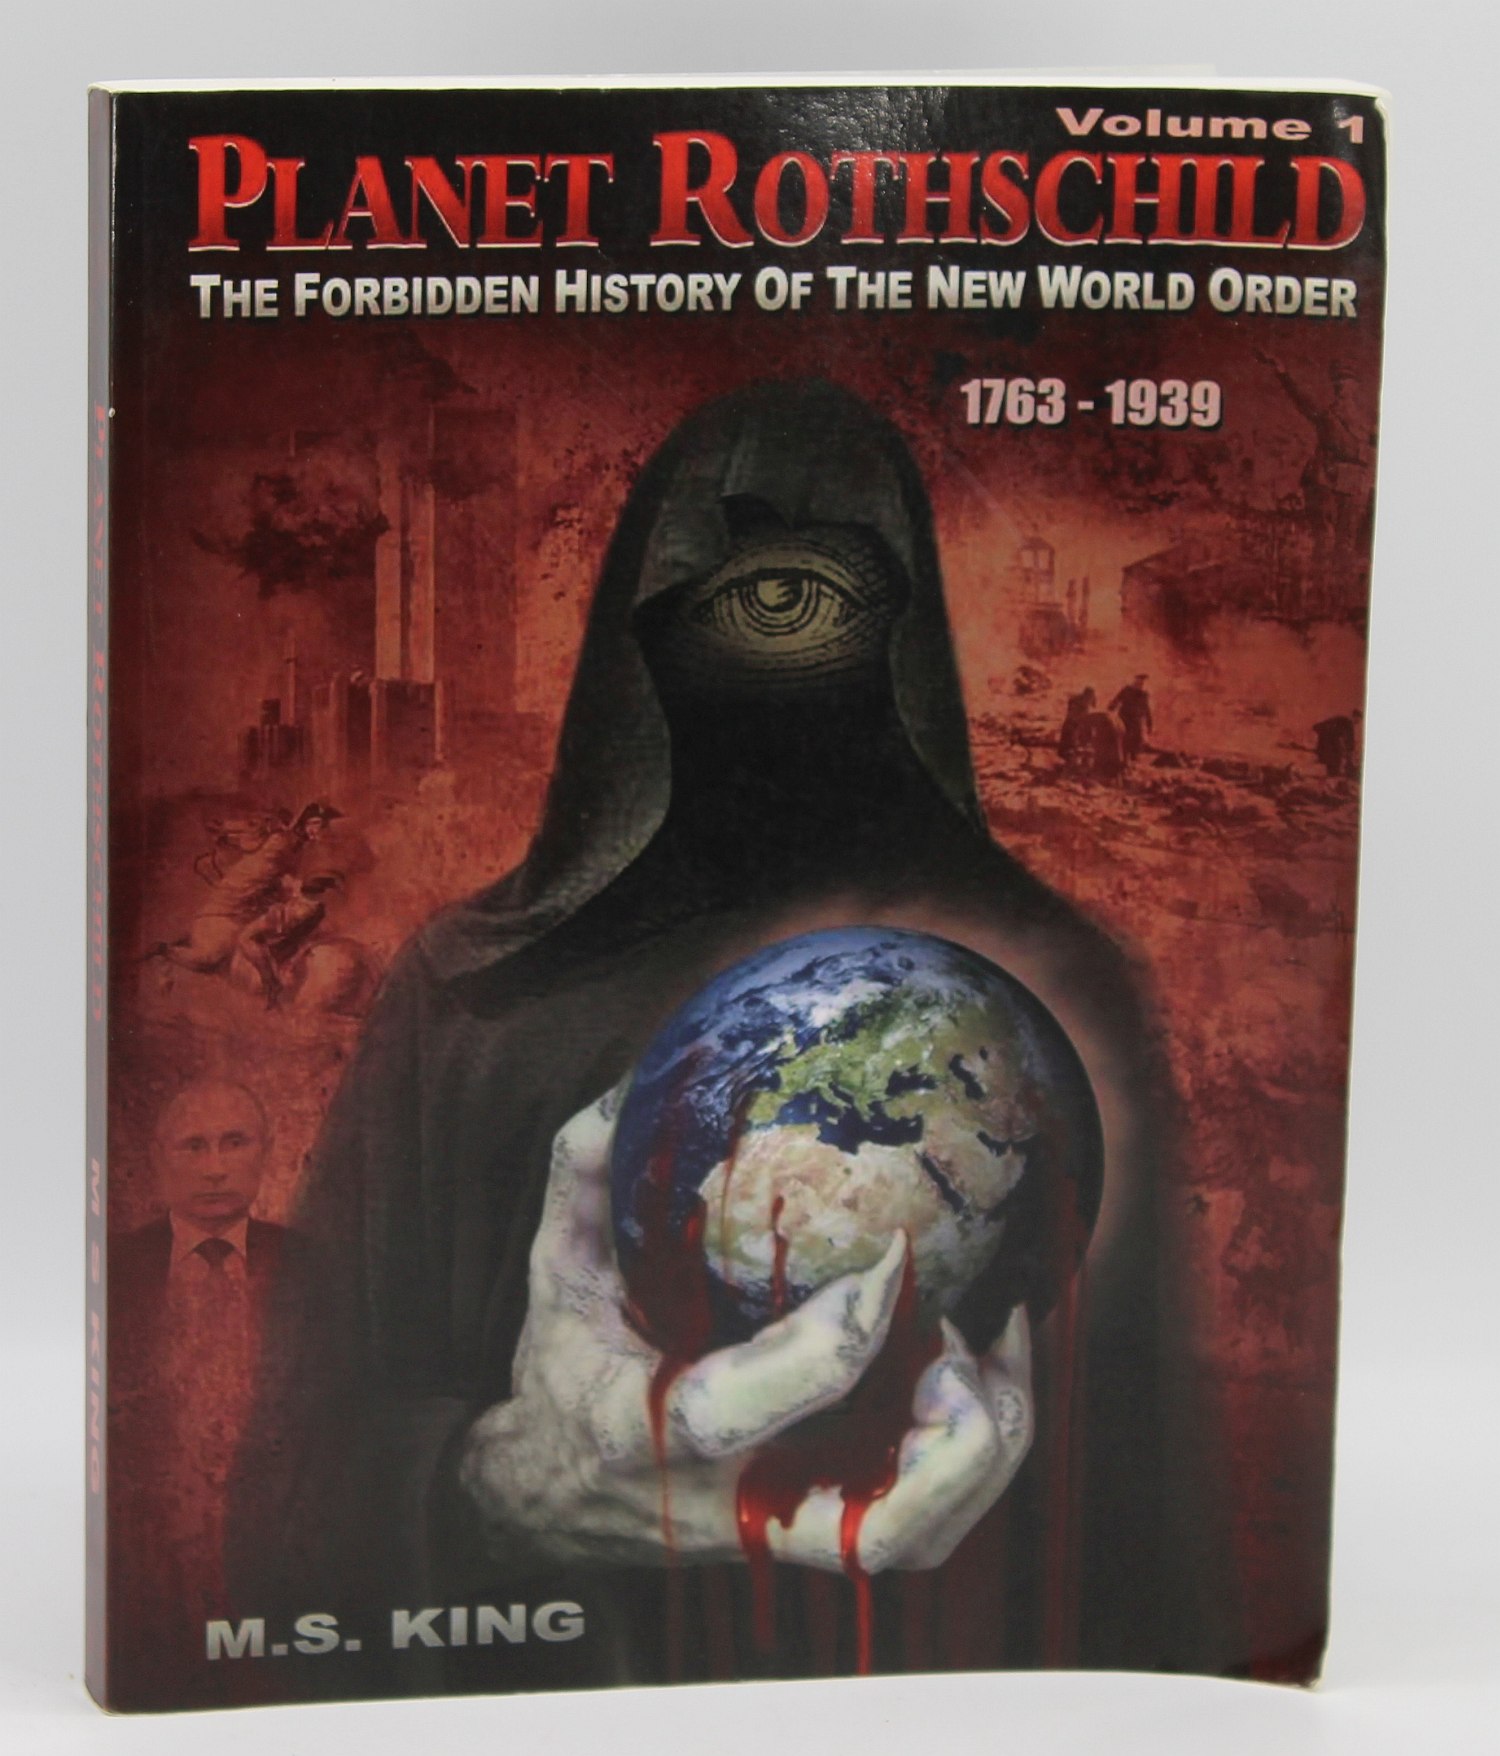 Image for Planet Rothschild, Volume 1. The Forbidden History of the New World Order 1763 - 1939